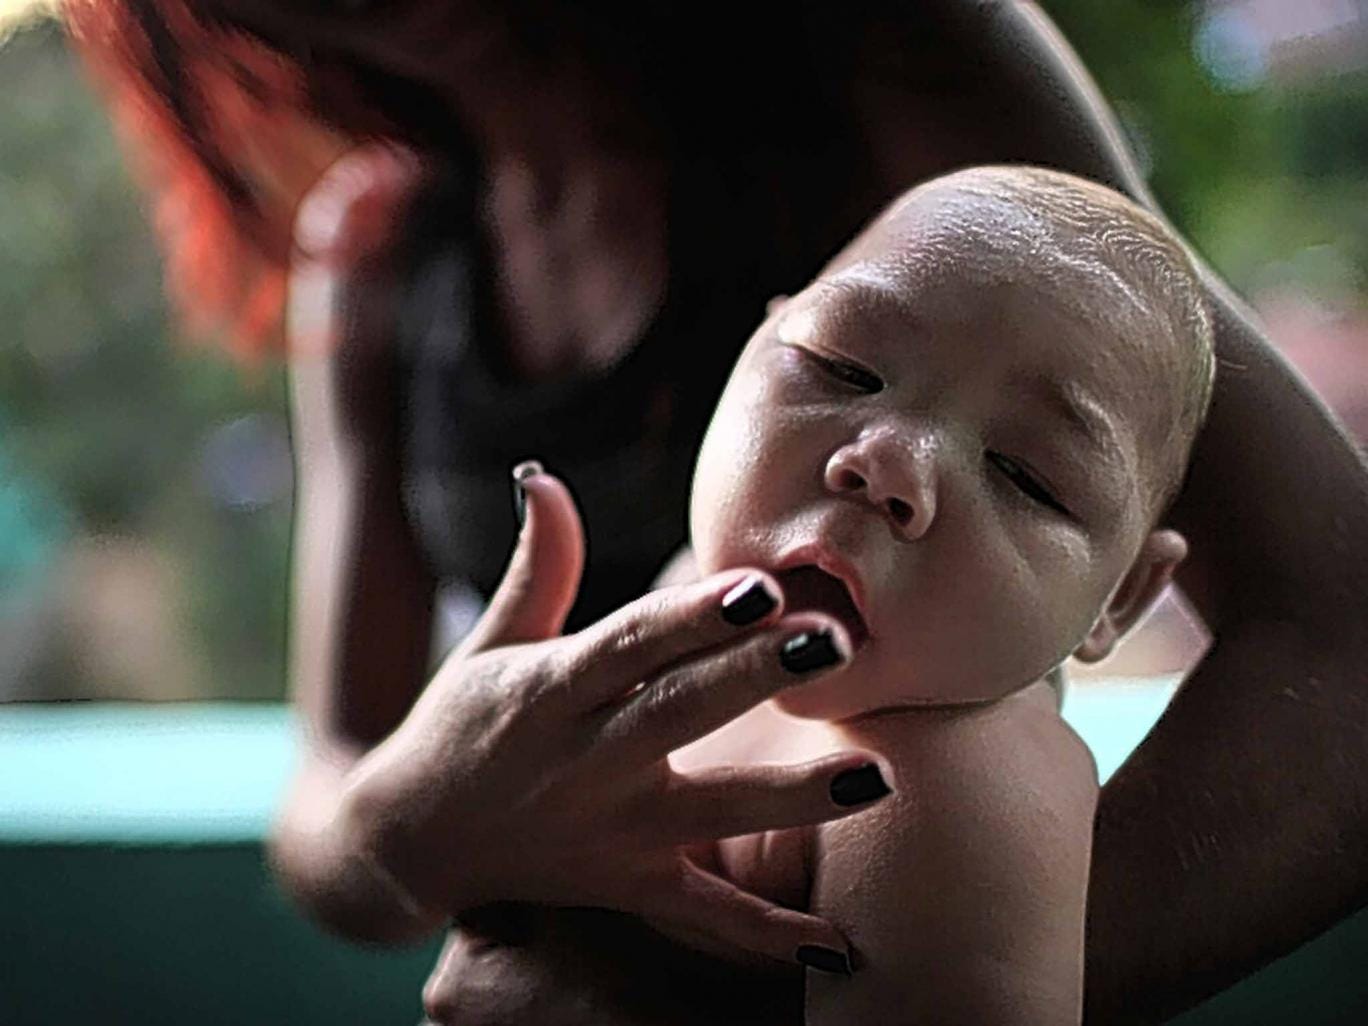 Bite fright: Zika virus may be responsible for a rise in infant microcephaly